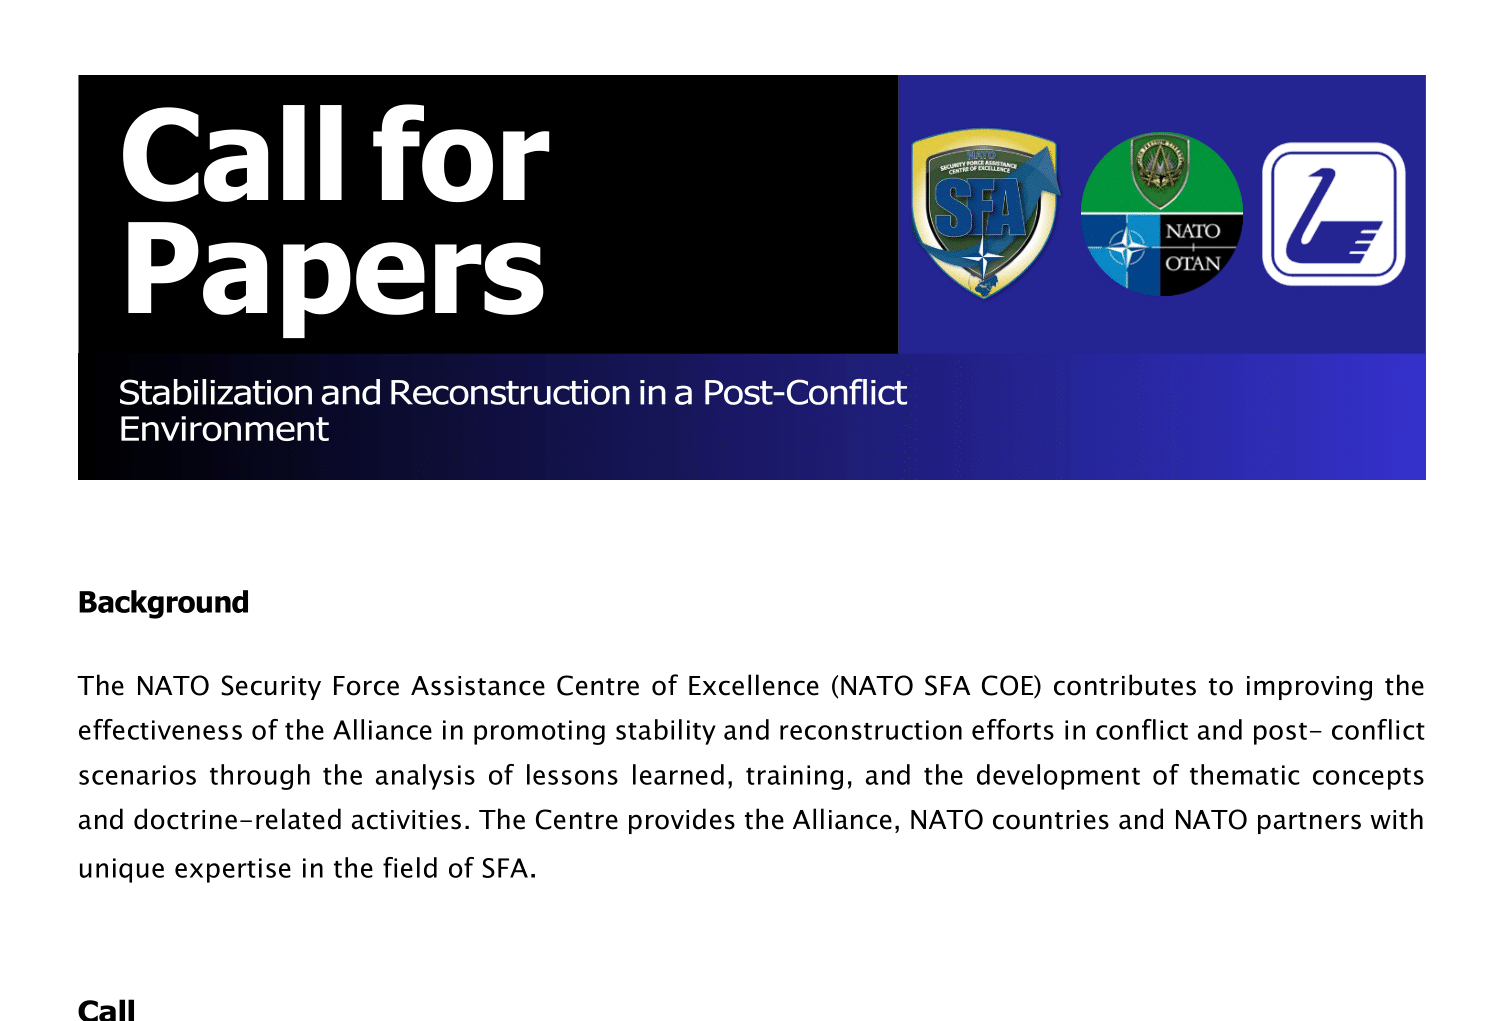 Editorial project on “Stabilization and Reconstruction in a Post-Conflict Environment” – Call for Papers